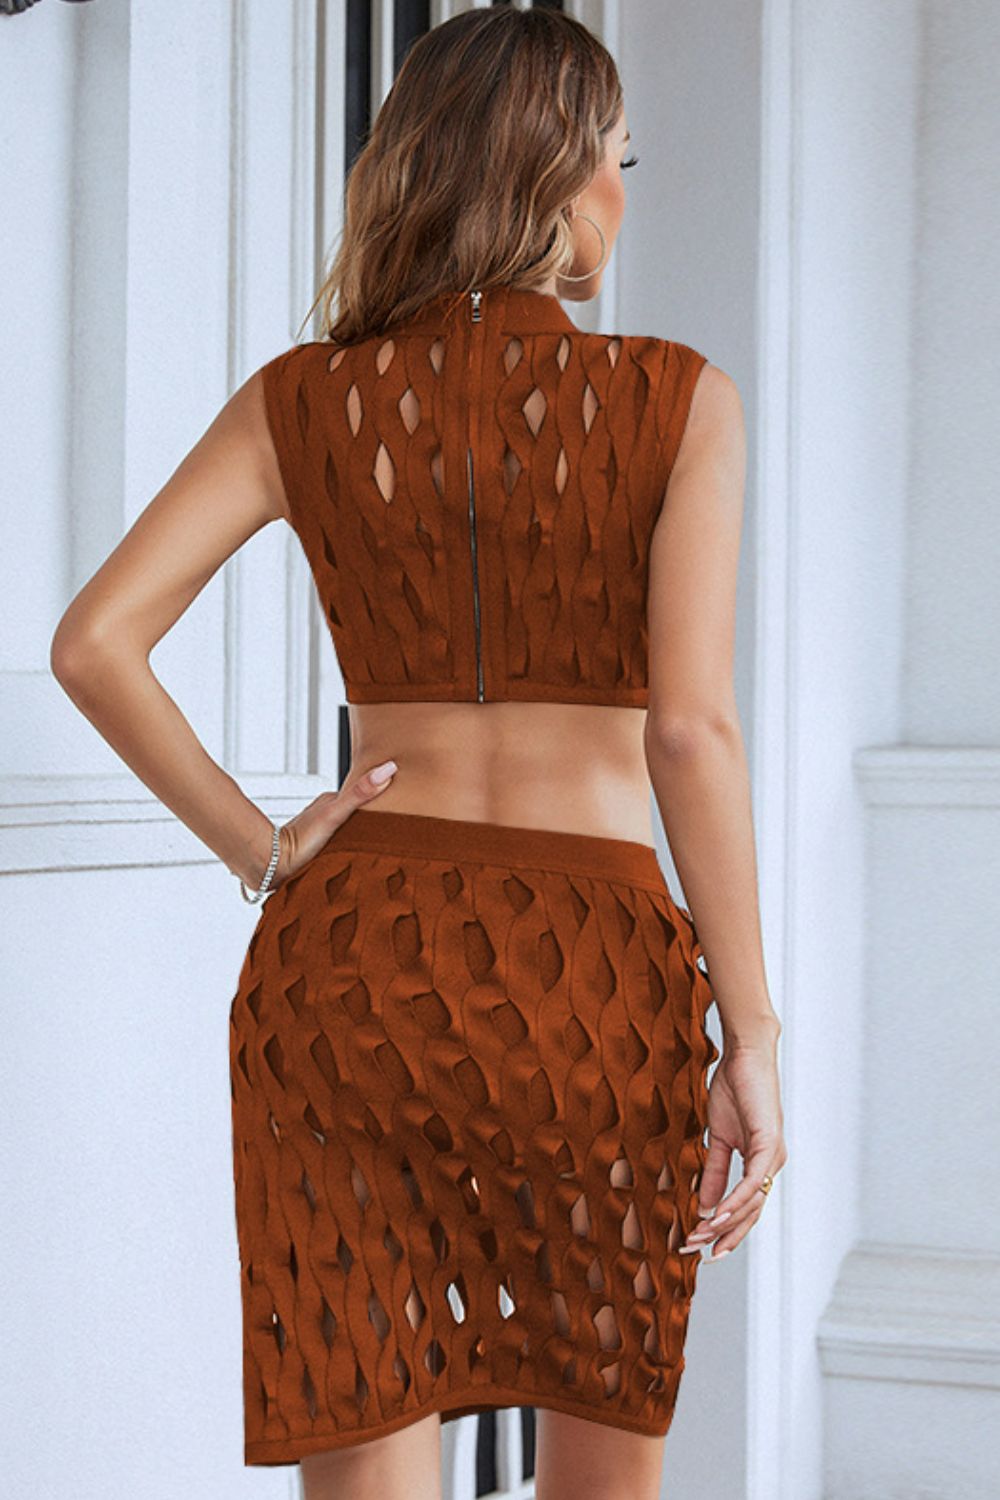 Women's Openwork Cropped Top and Skirt Set